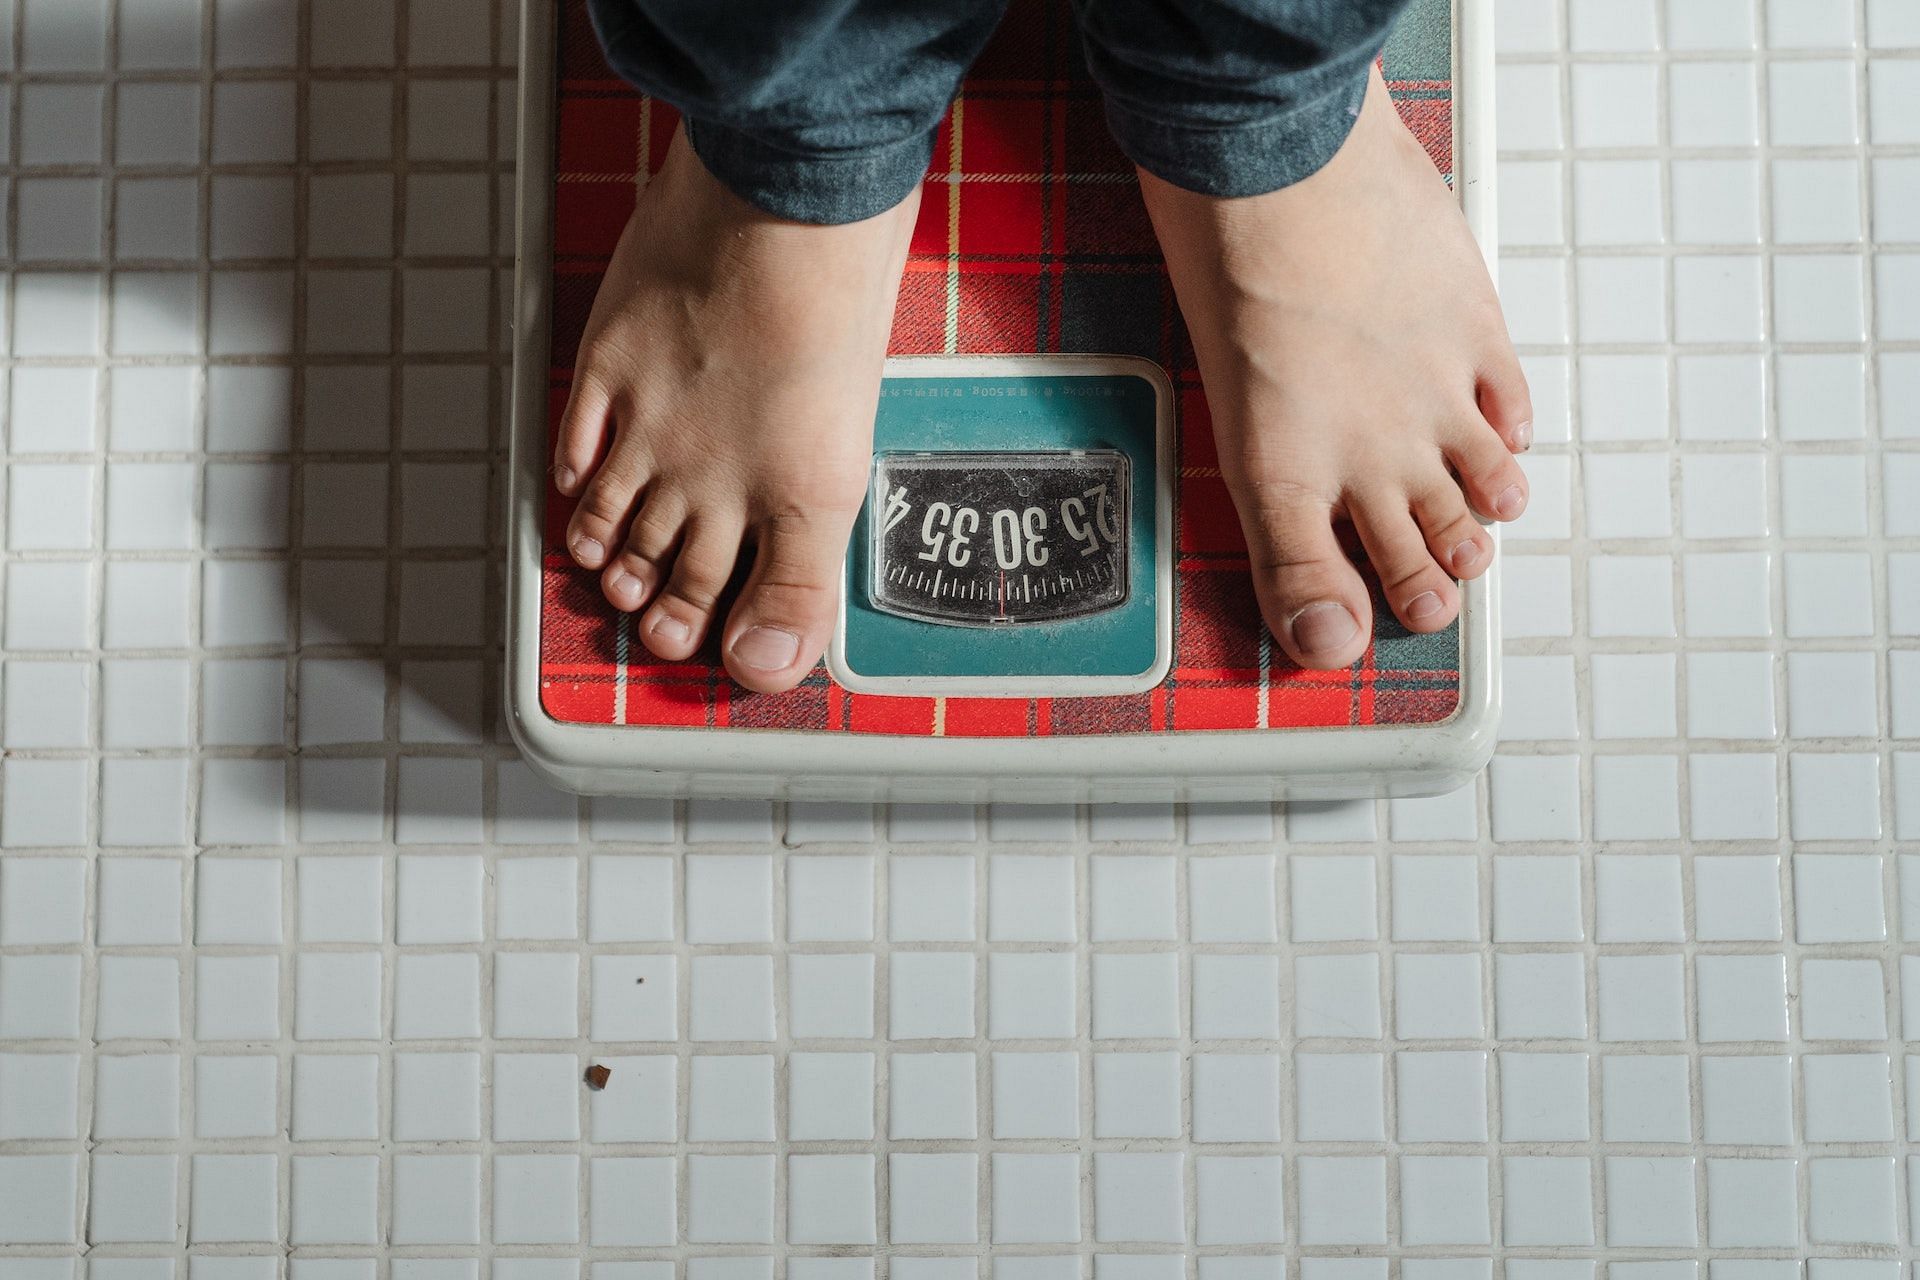 Basal metabolic rate is the calories your body needs to perform basic functions. (Photo via Pexels/Ketut Subiyanto)